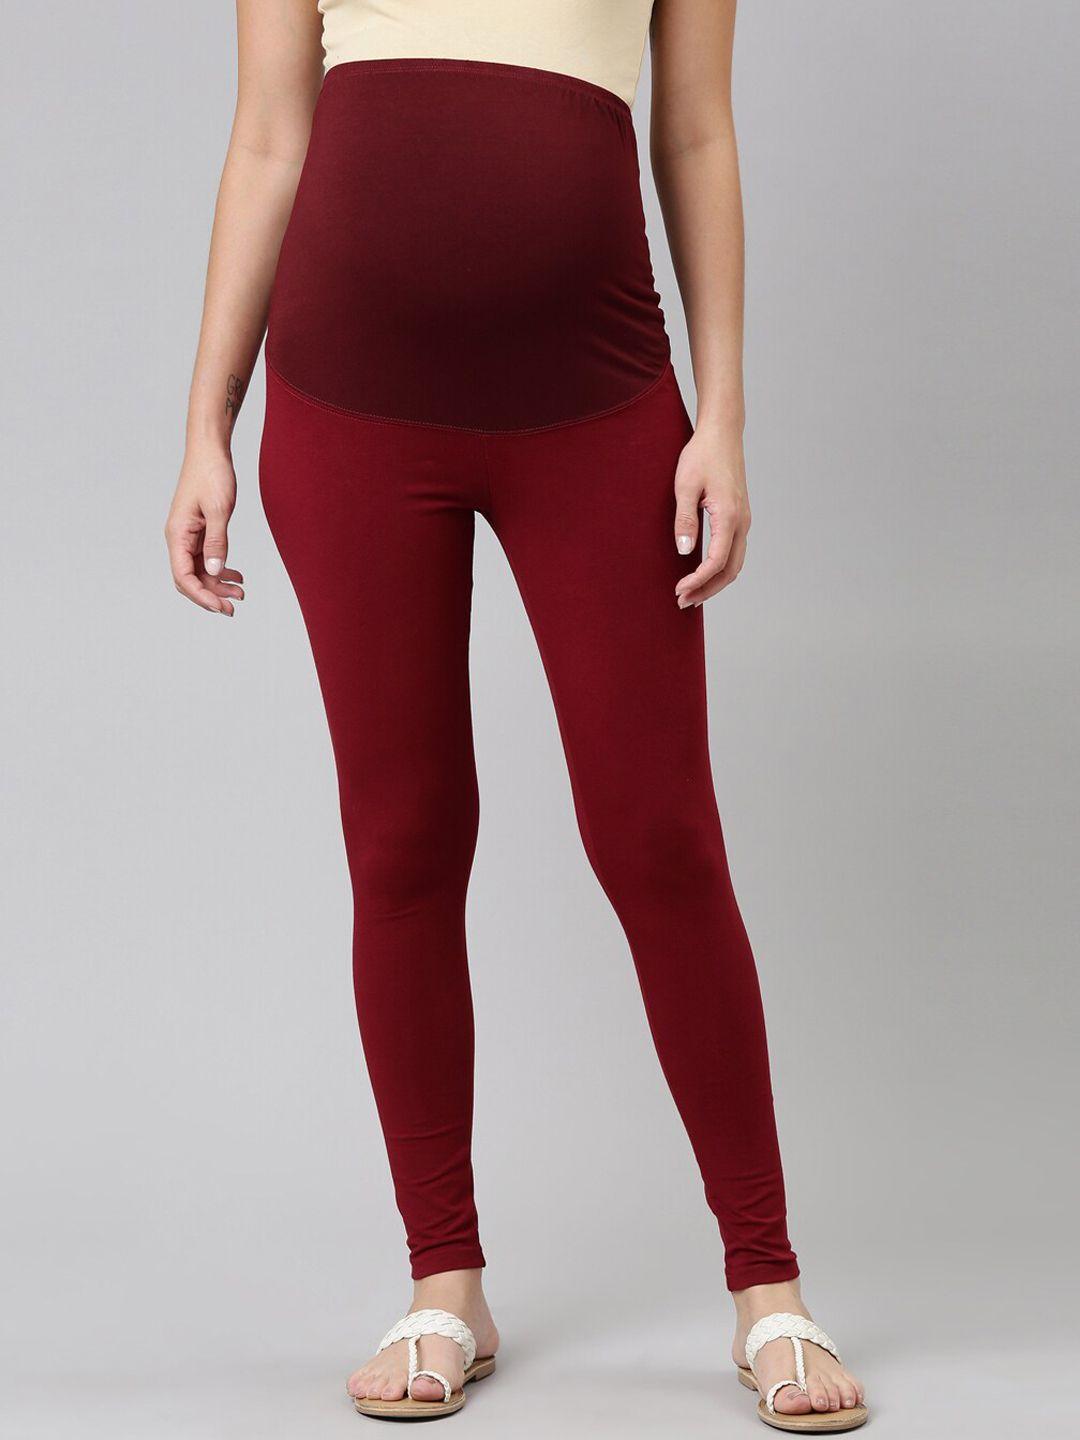 go colors women maroon red solid cotton ankle-length maternity leggings